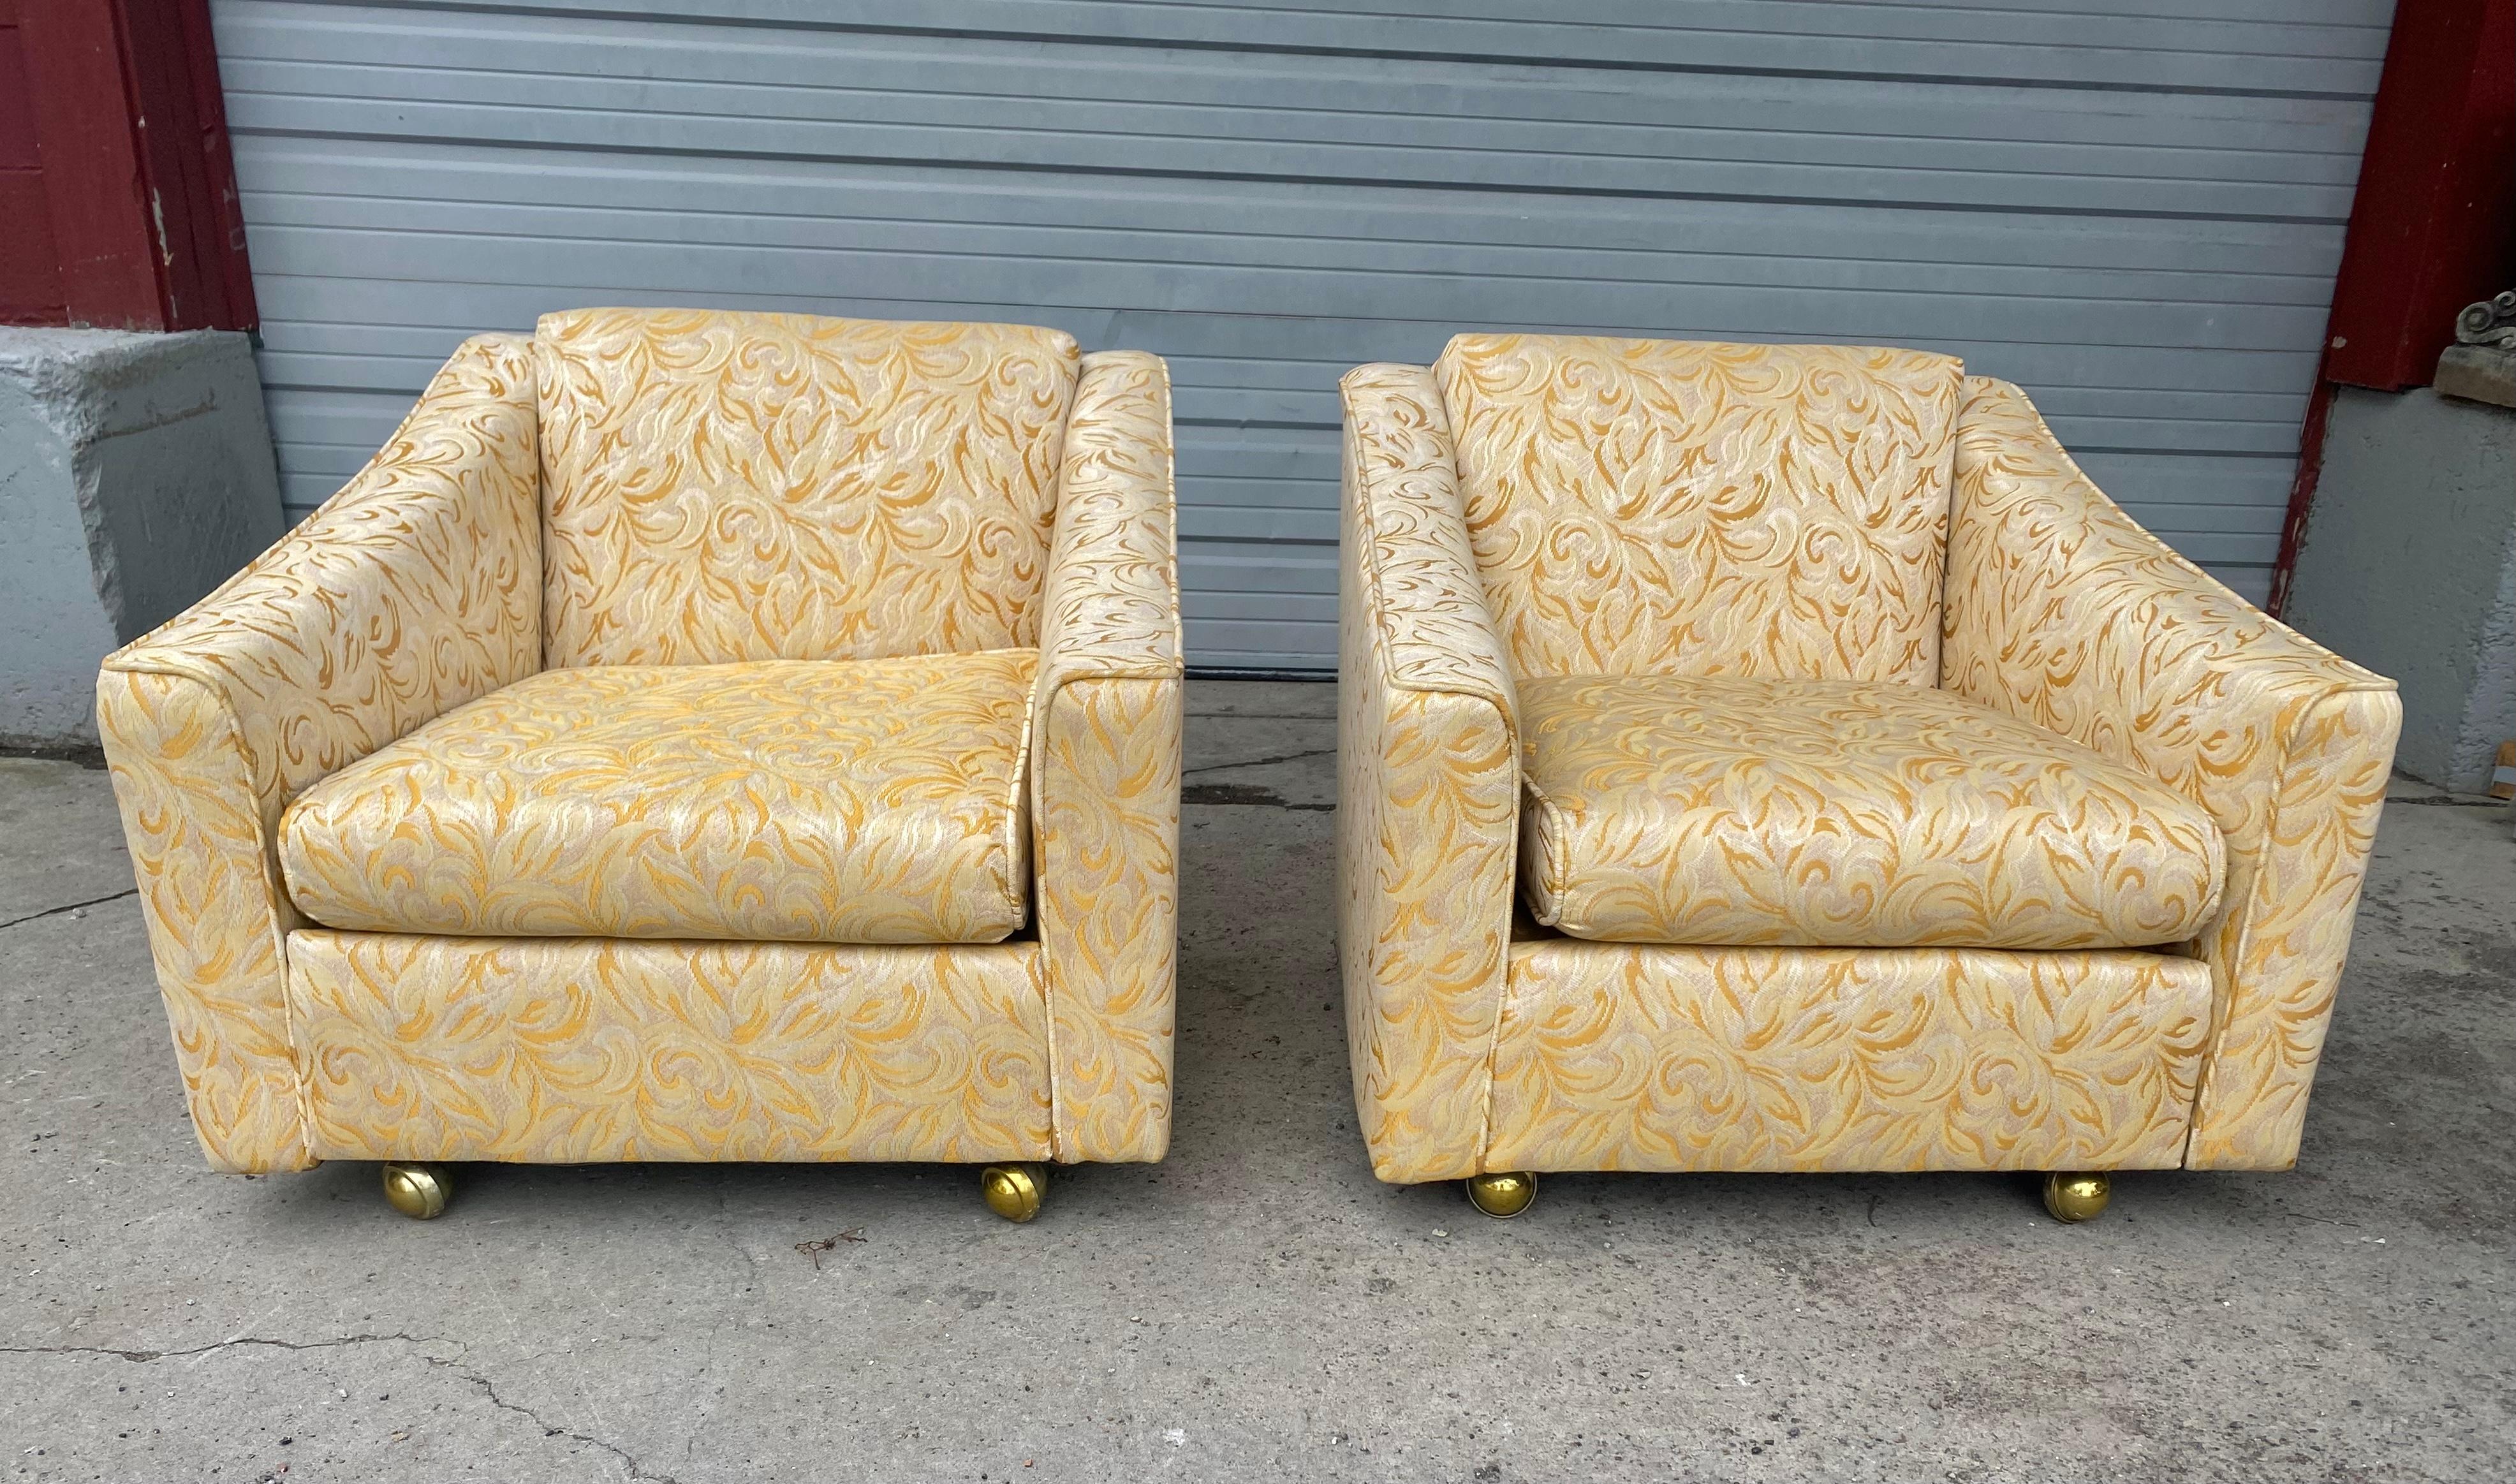 Brass Matched Pair Stylized Mid-Century Modern Lounge Chairs, Dunbar - Probber